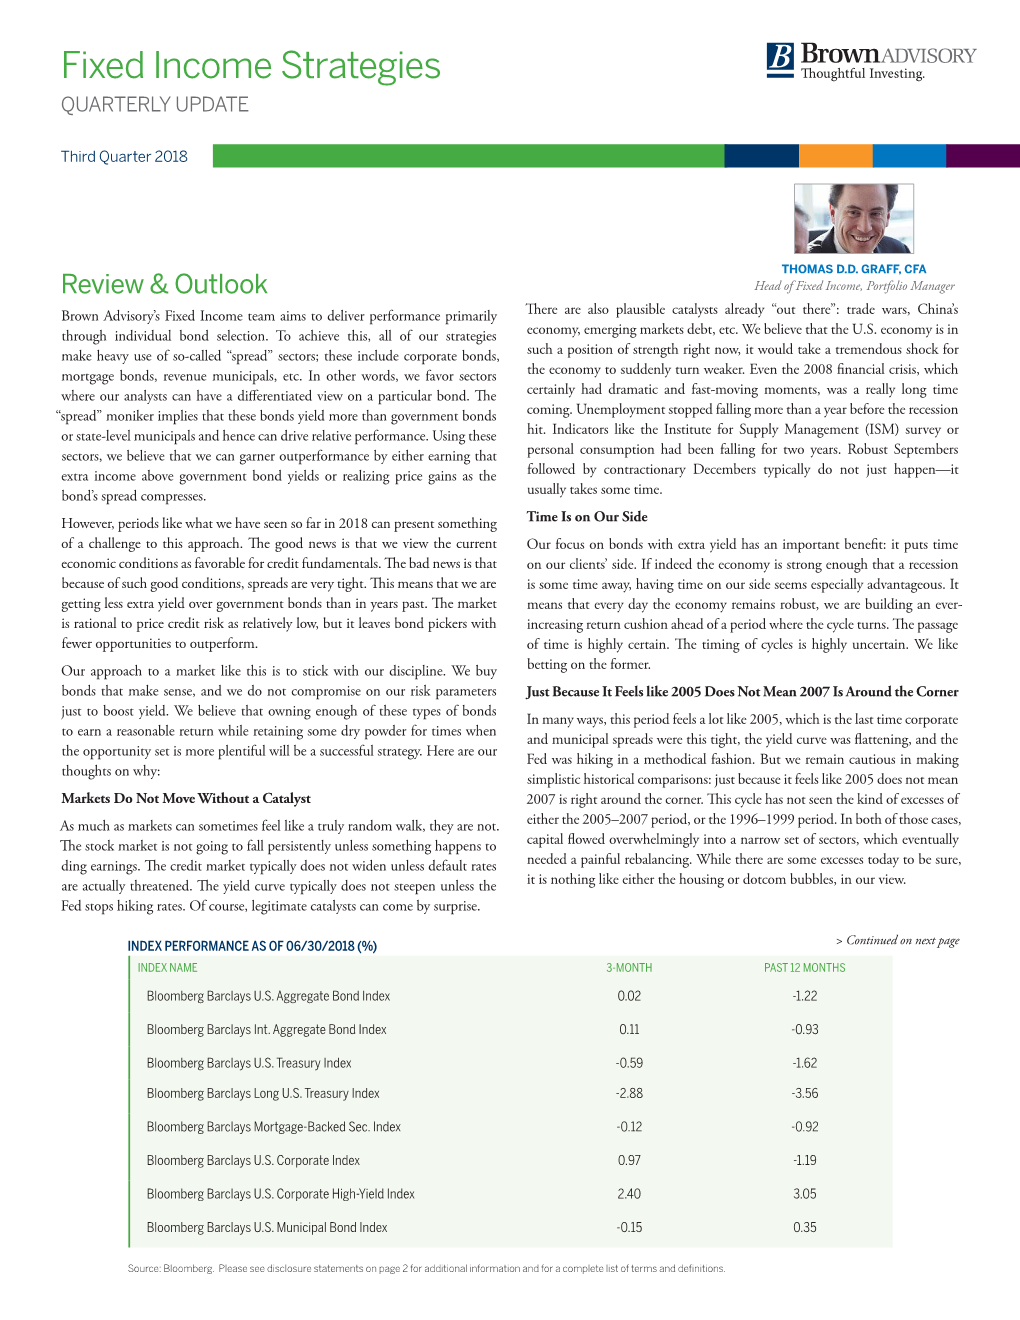 Fixed Income Strategies QUARTERLY UPDATE